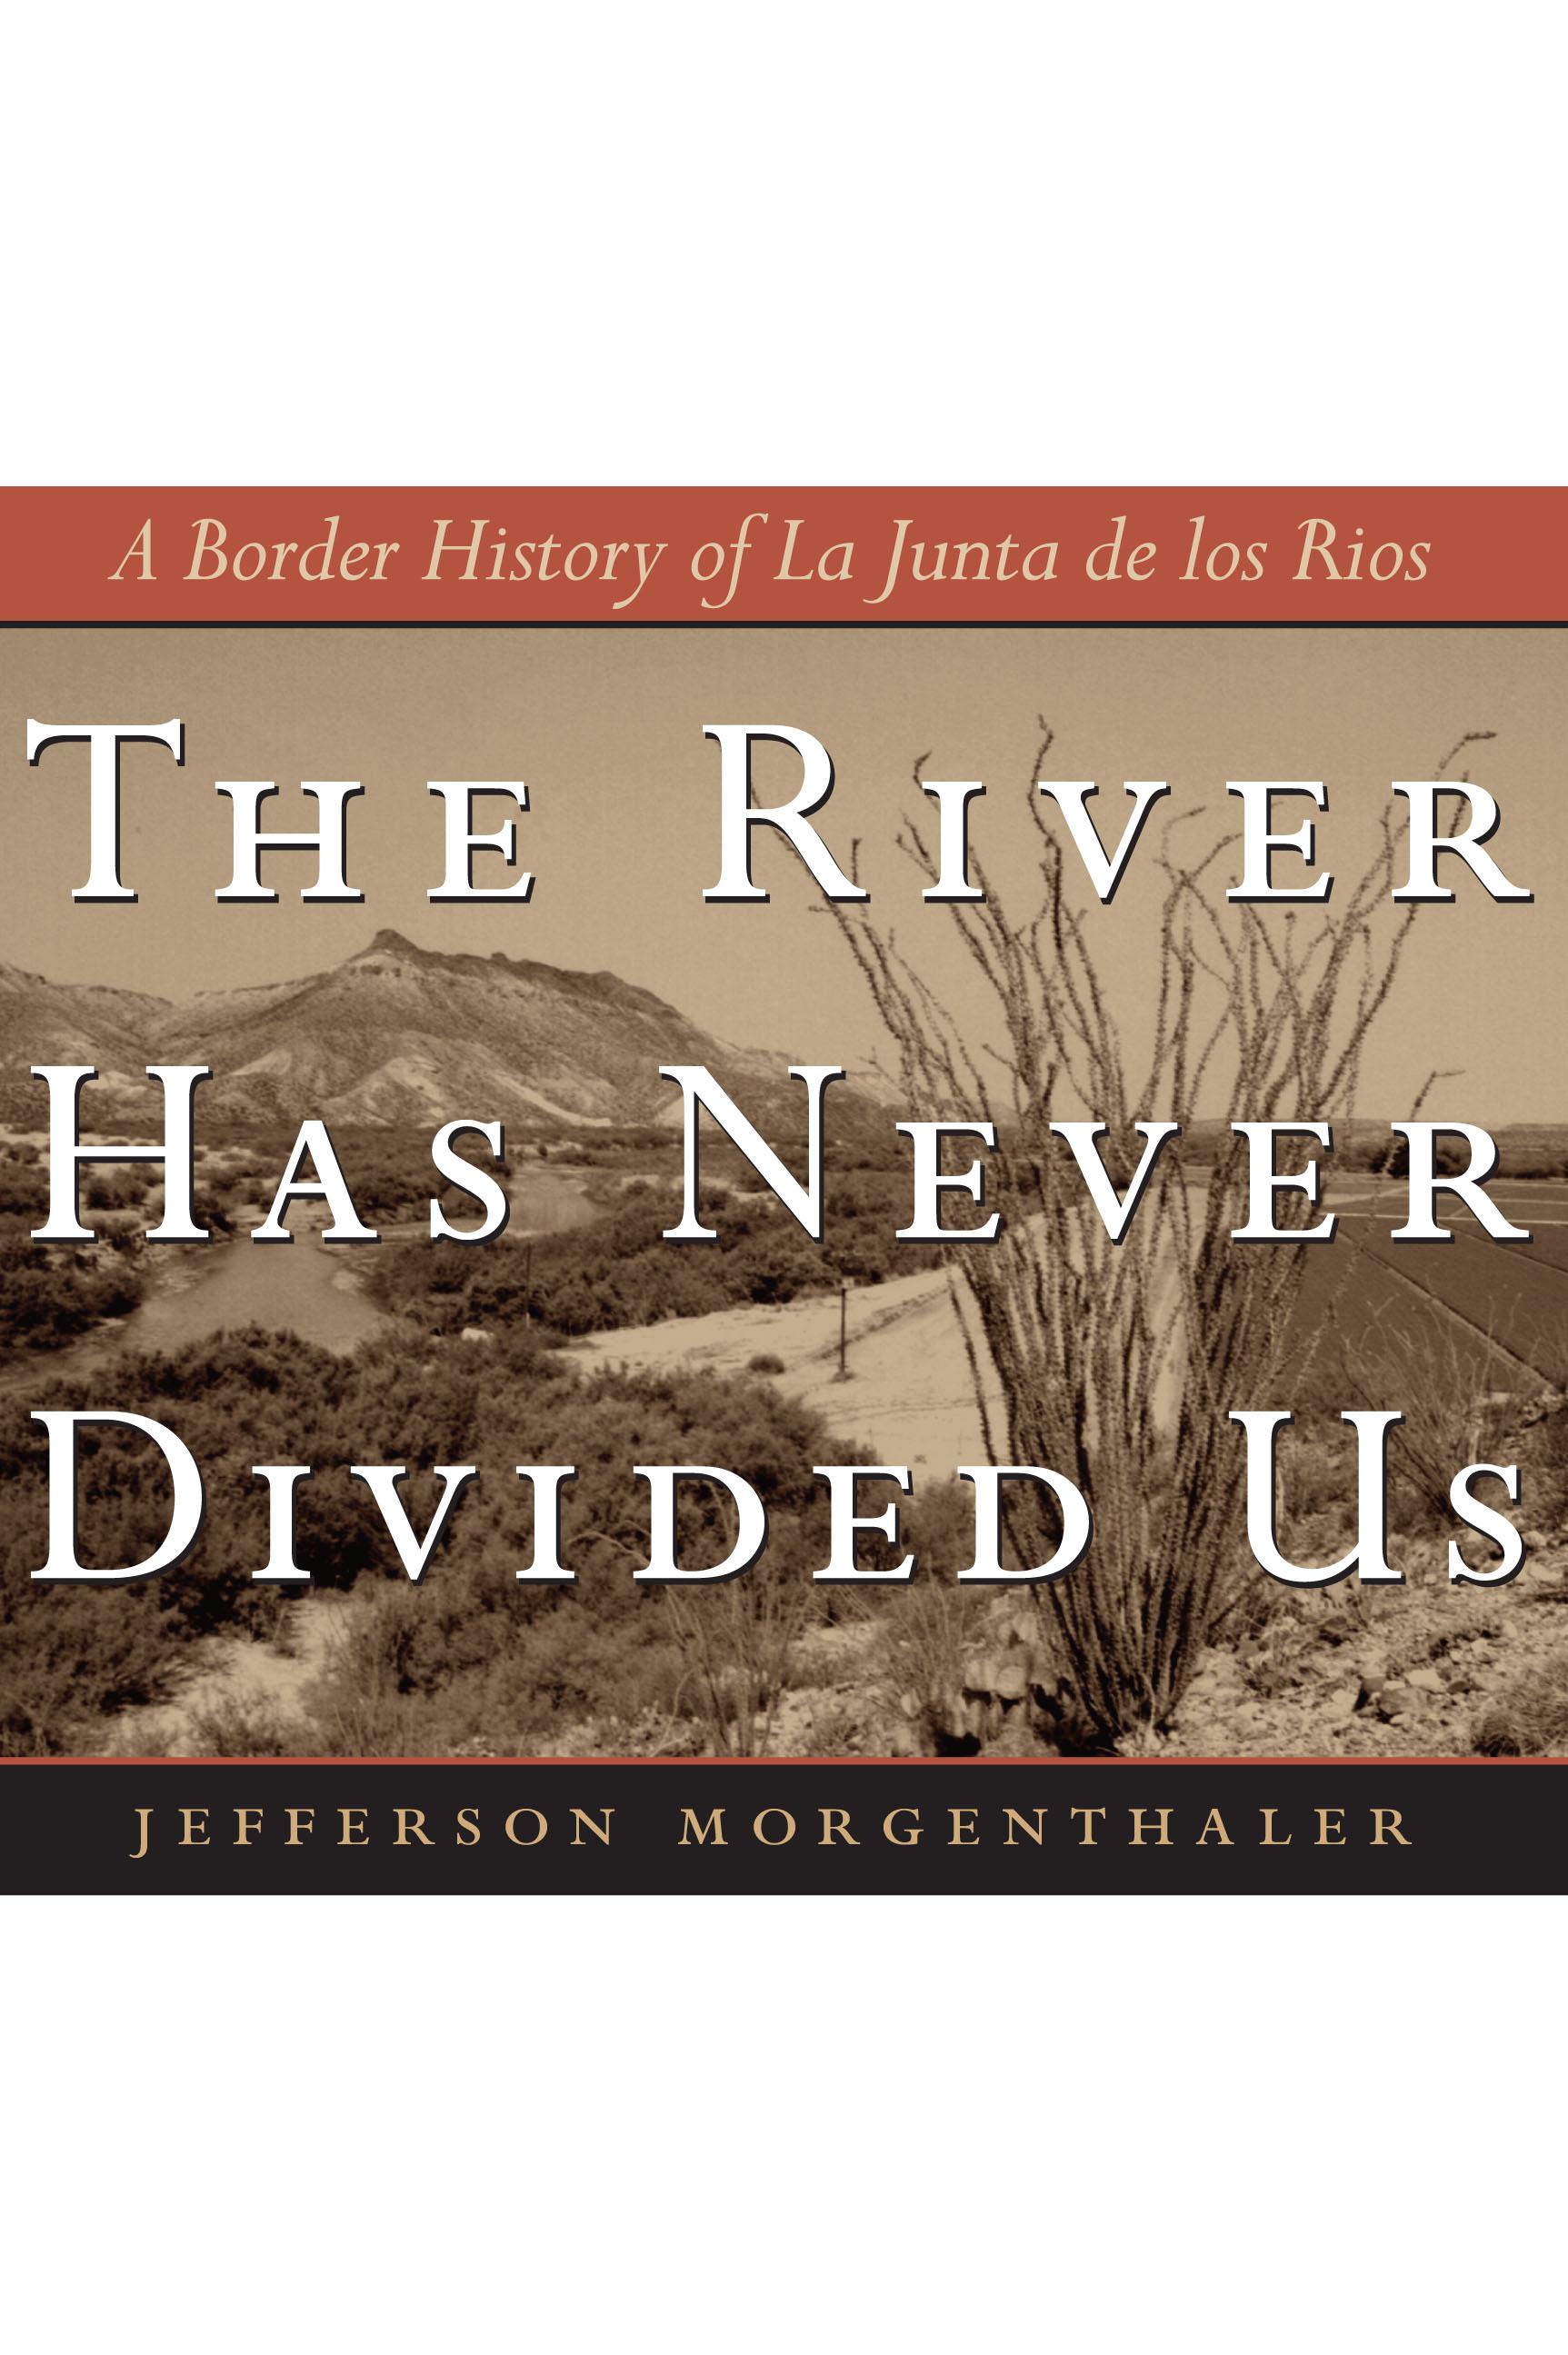 The River Has Never Divided Us